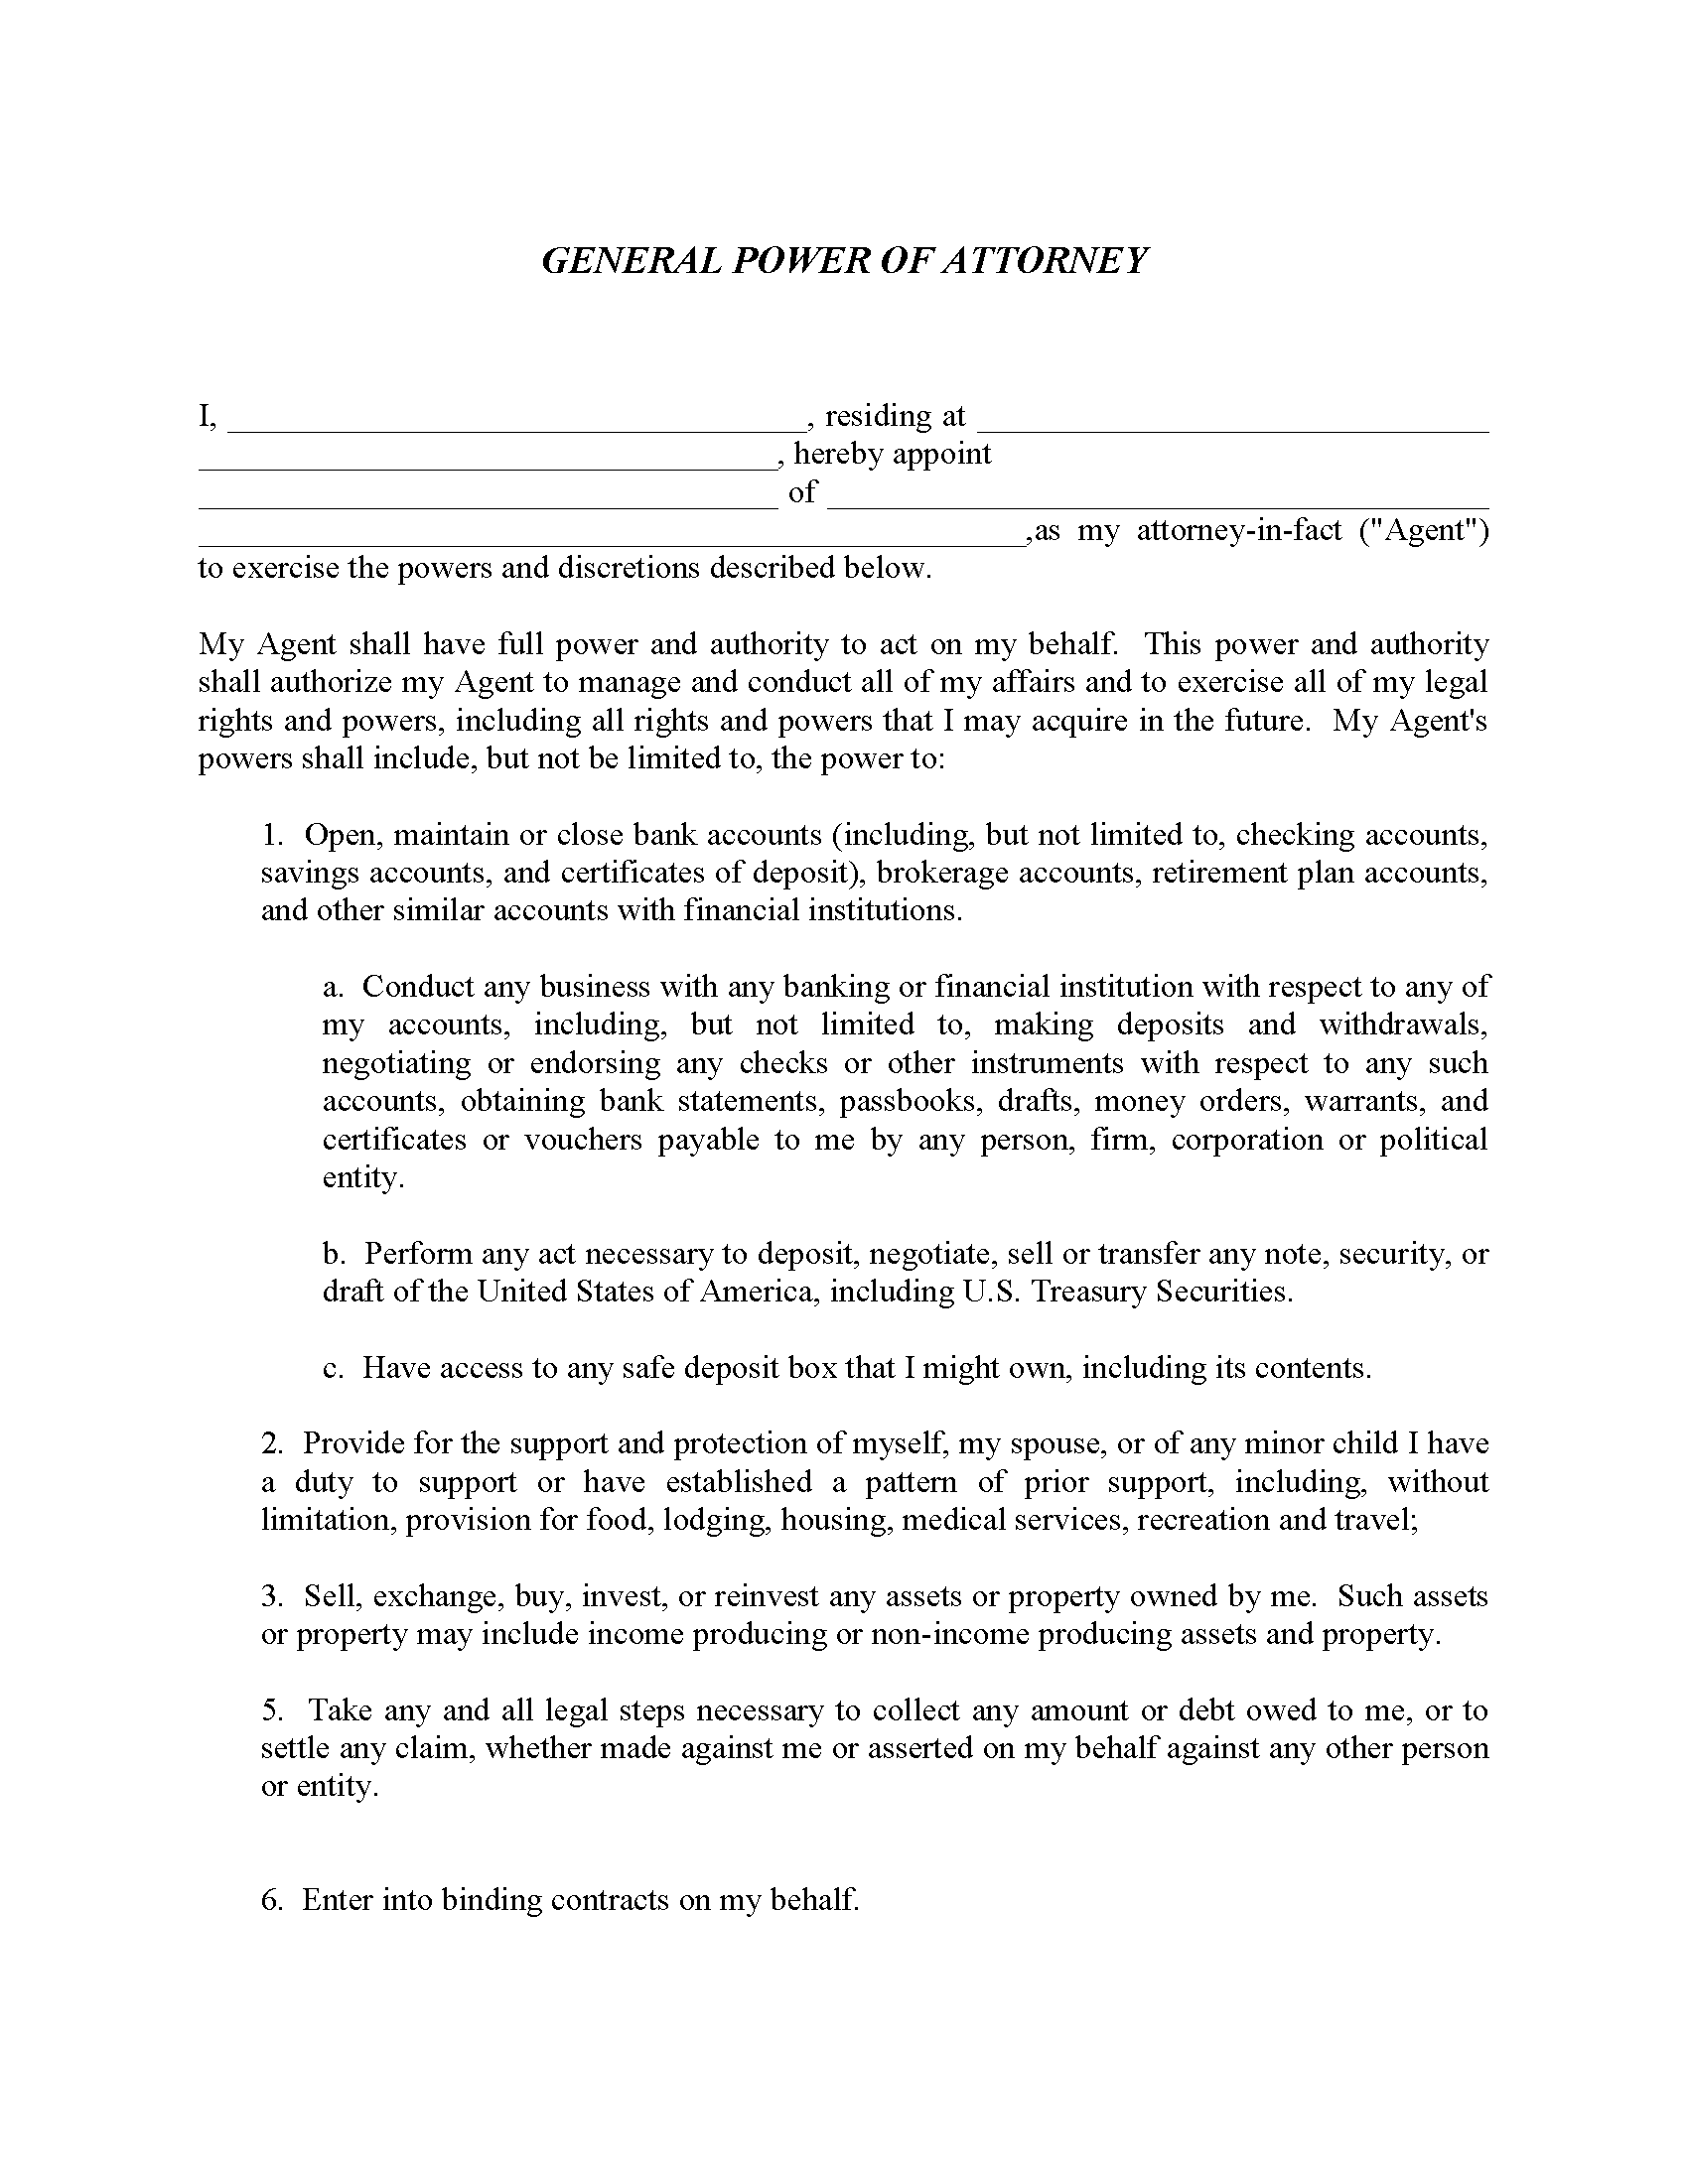 power-of-attorney-free-printable-forms-printable-forms-free-online